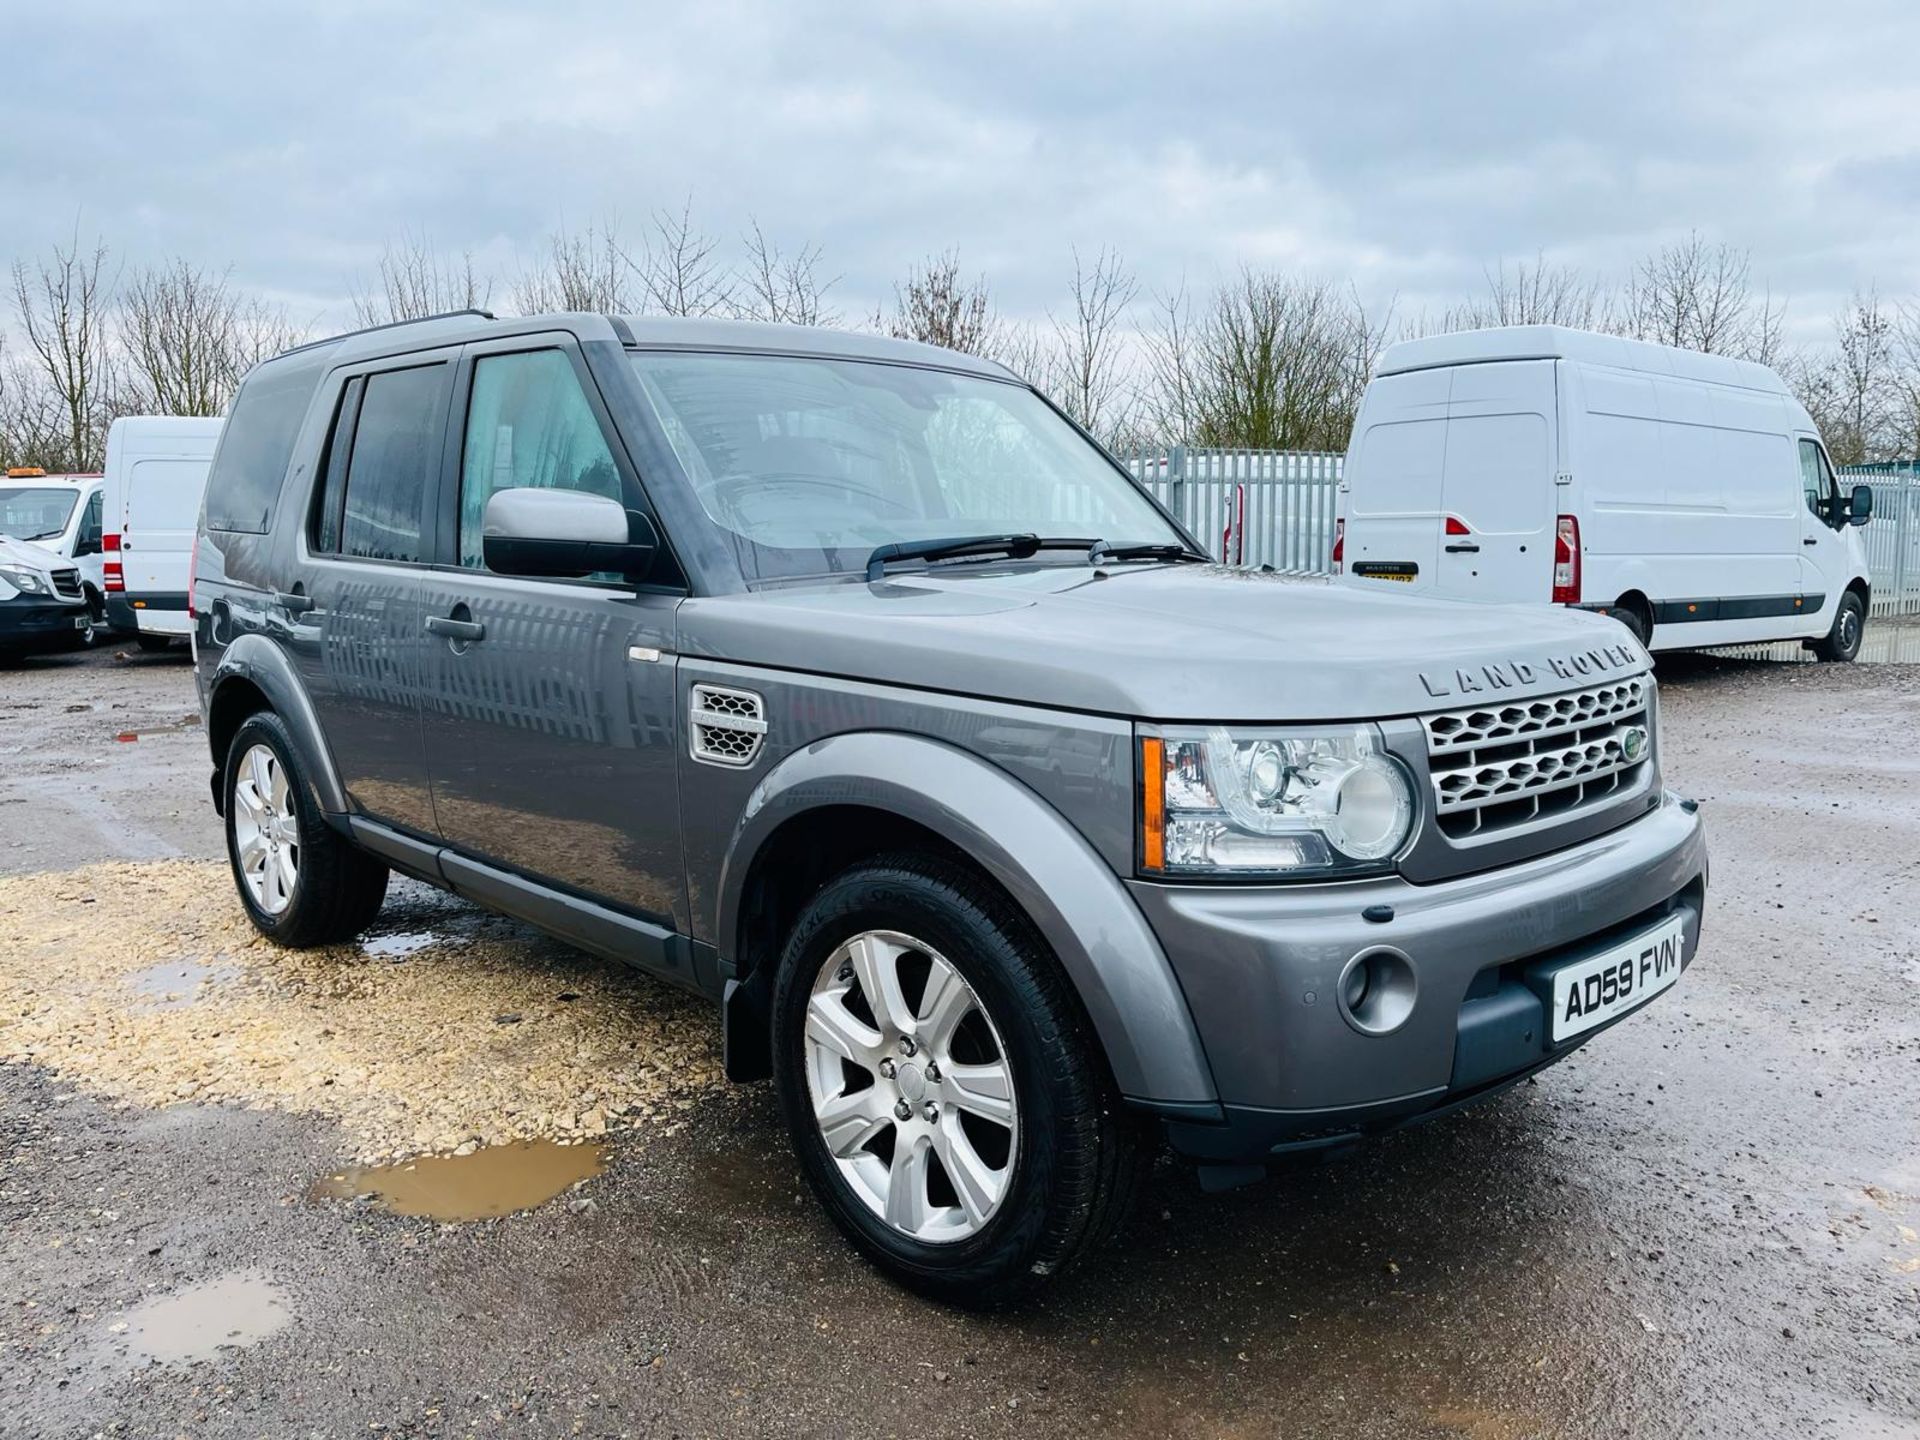 ** ON SALE ** Land Rover Discovery 4 3.0 TDV6 HSE 4WD 2009 '59 Reg' Full Spec - No Vat - 7 Seats